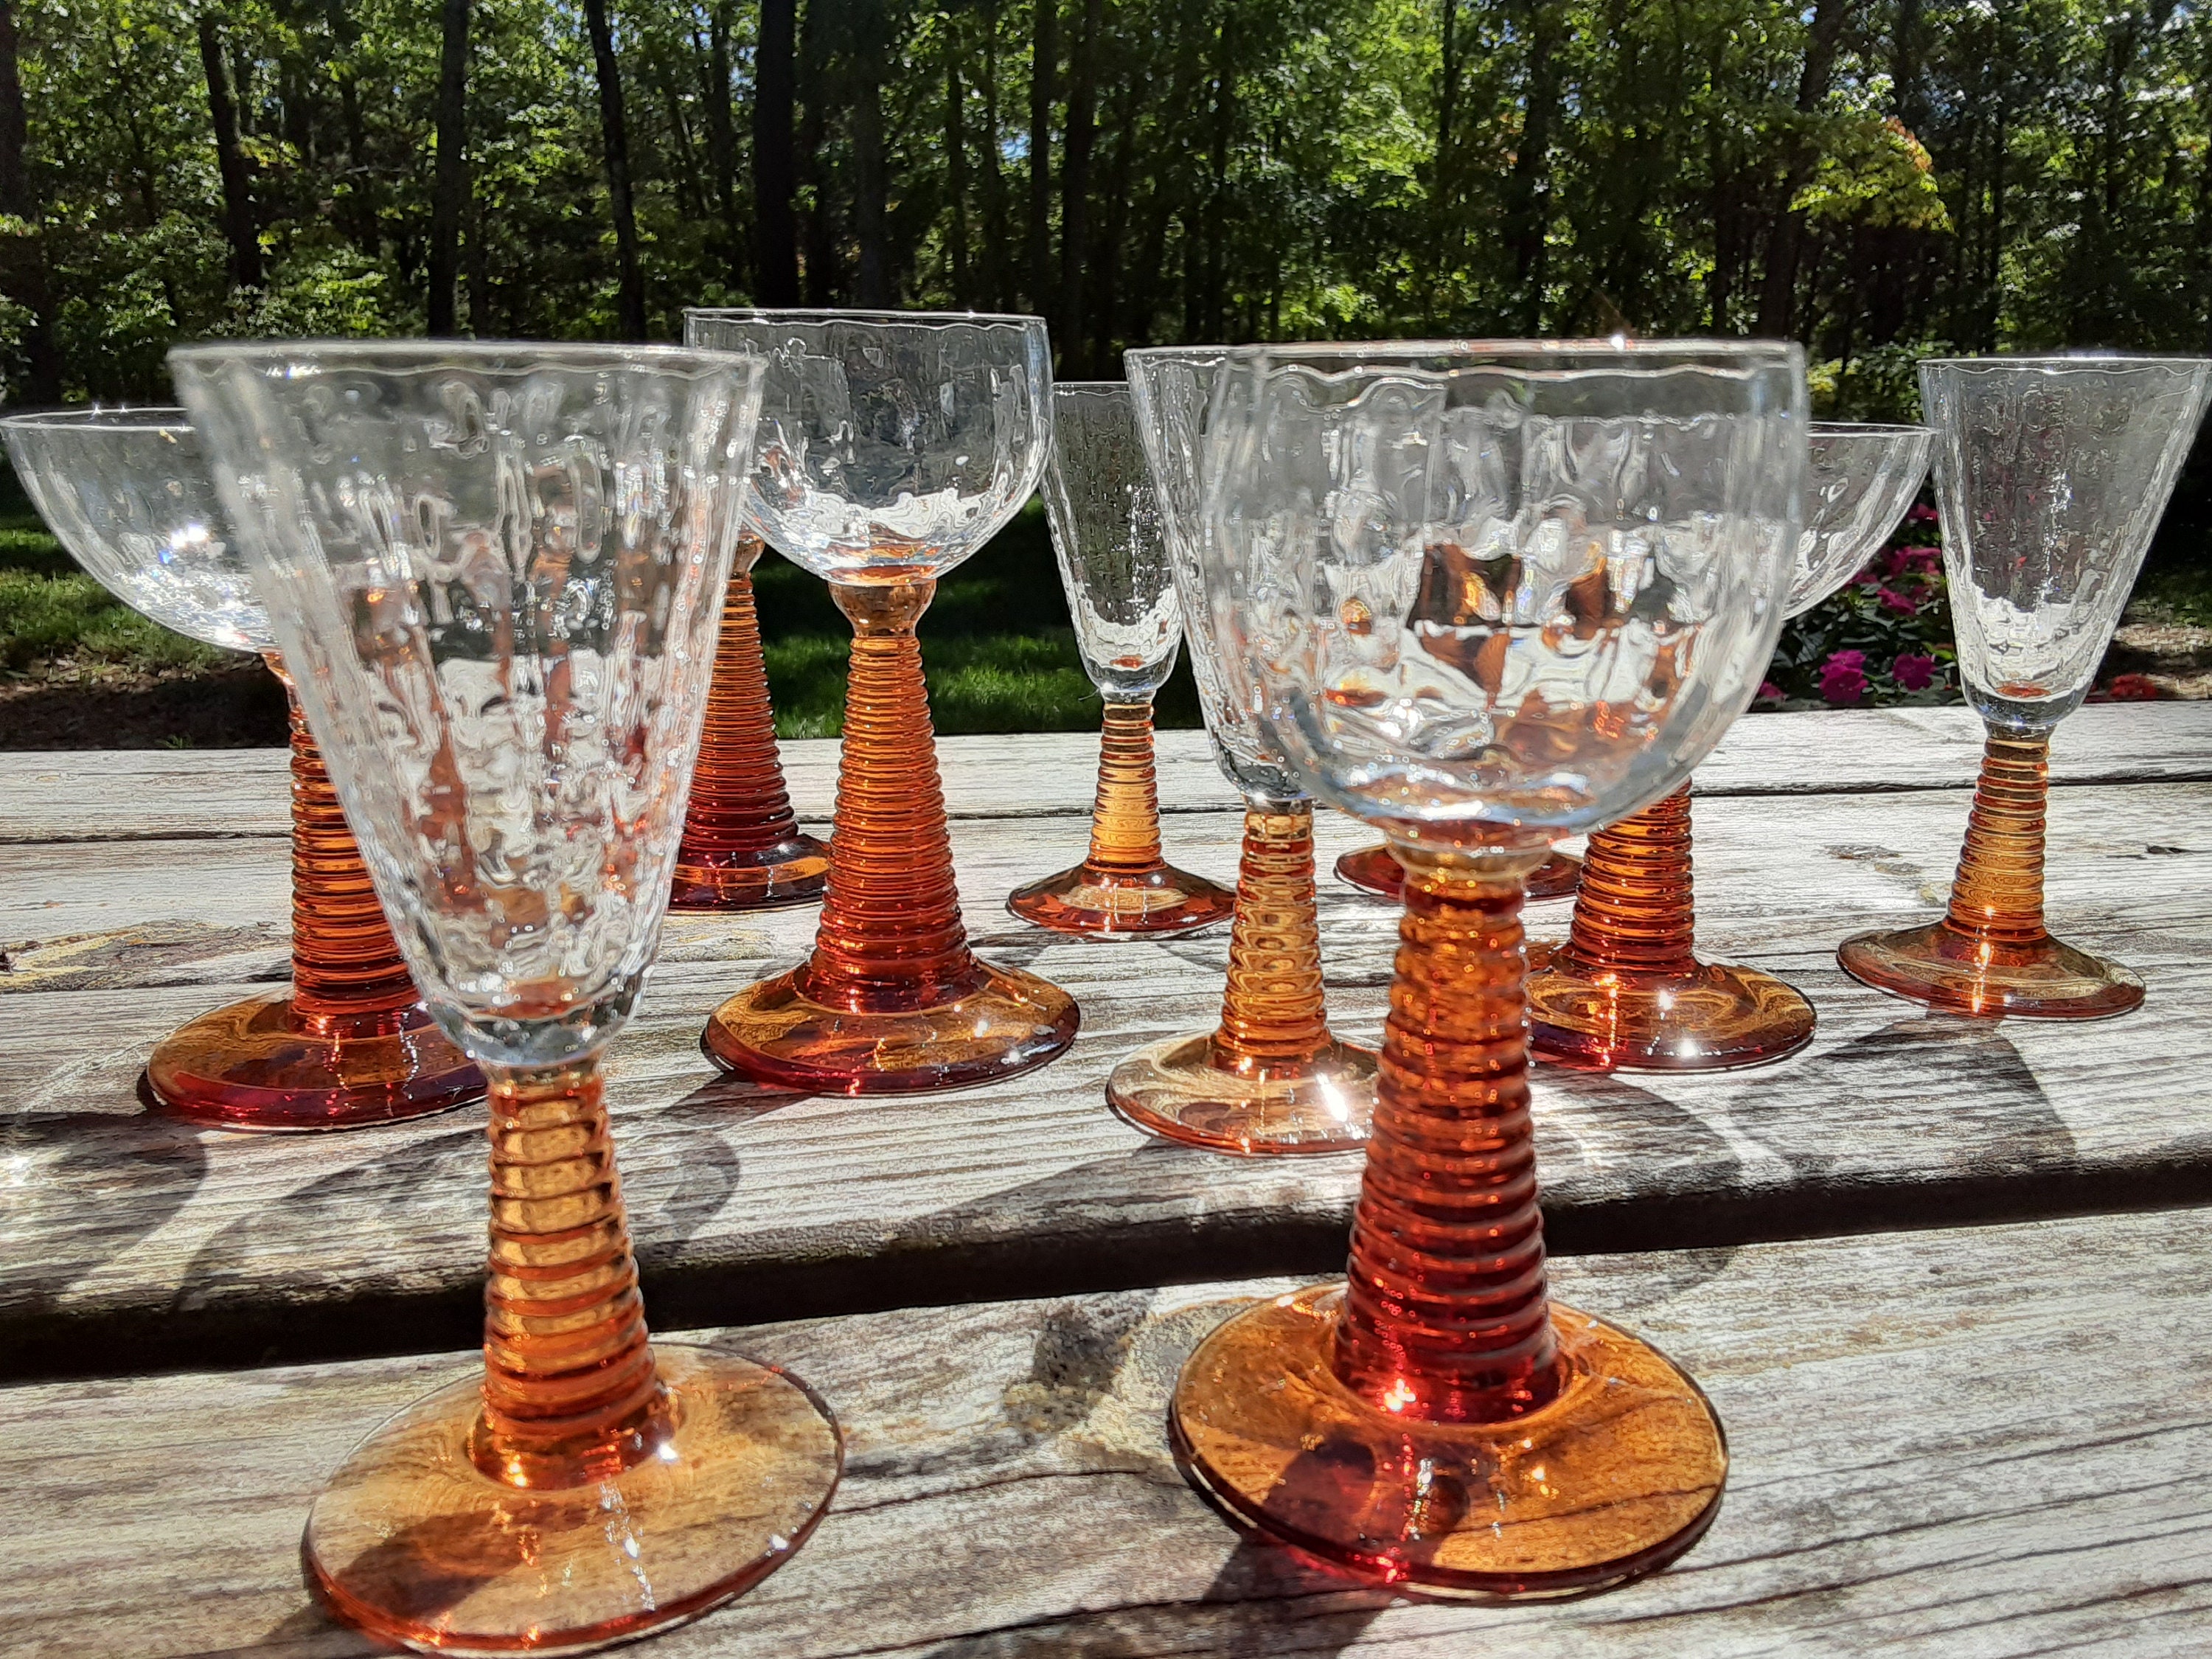 ZMOWIPDL Ribbed Glassware Vintage Drinking Glasses with Straws Set of  6,Clear Fluted Ripple Glass Cu…See more ZMOWIPDL Ribbed Glassware Vintage